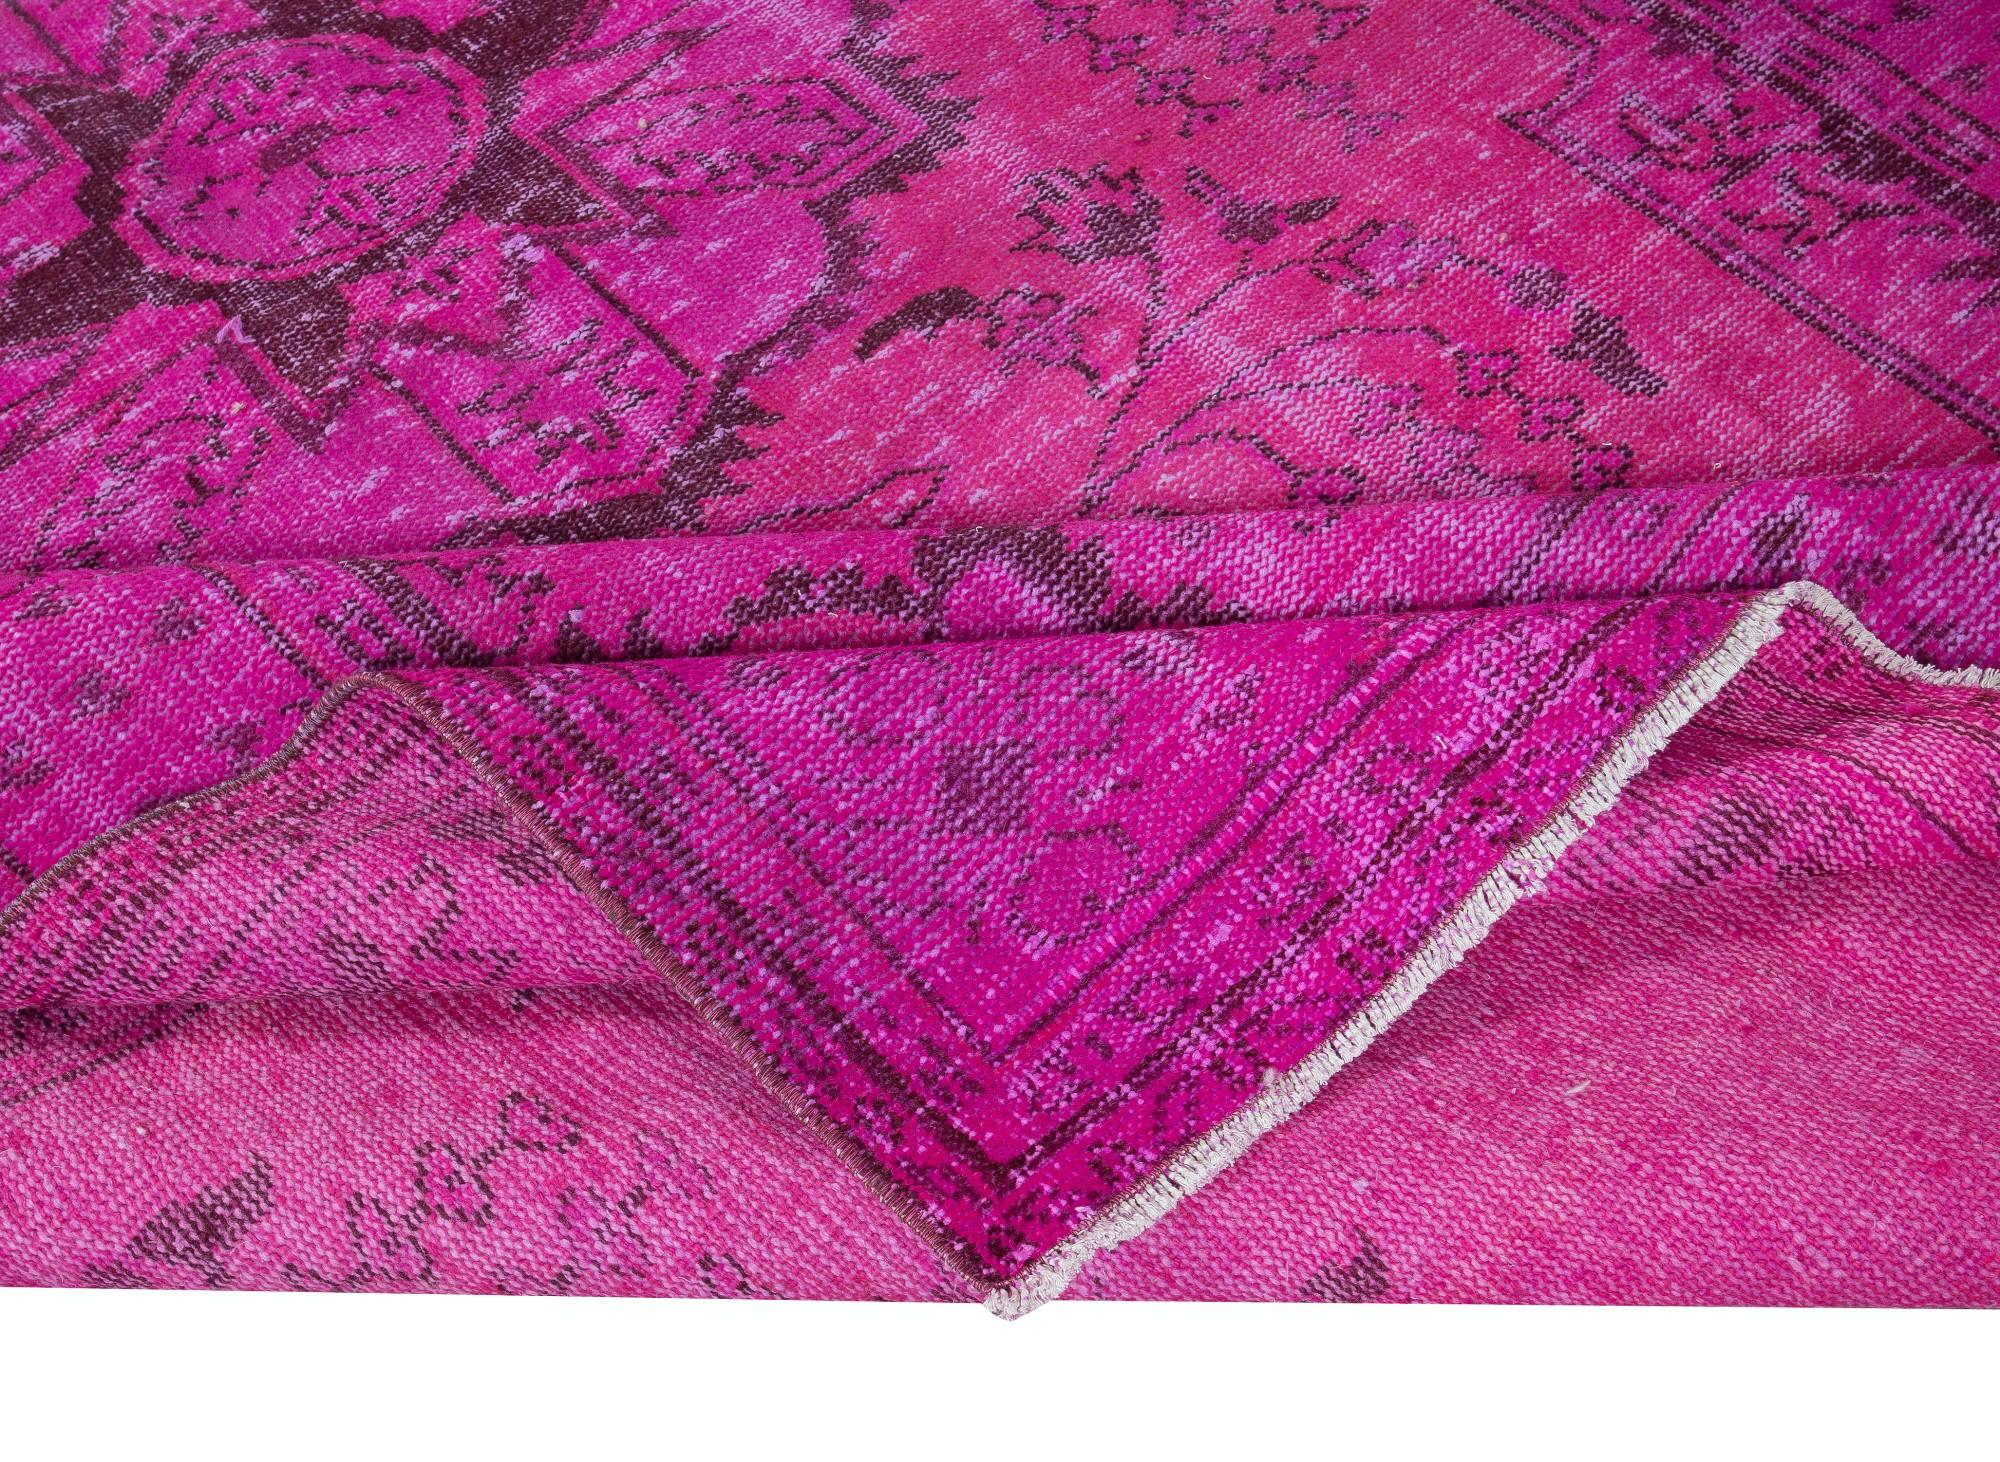 Hand-Woven 6x9.7 Ft Hand-Made Turkish Area Rug in Pink, Modern Wool and Cotton Carpet For Sale